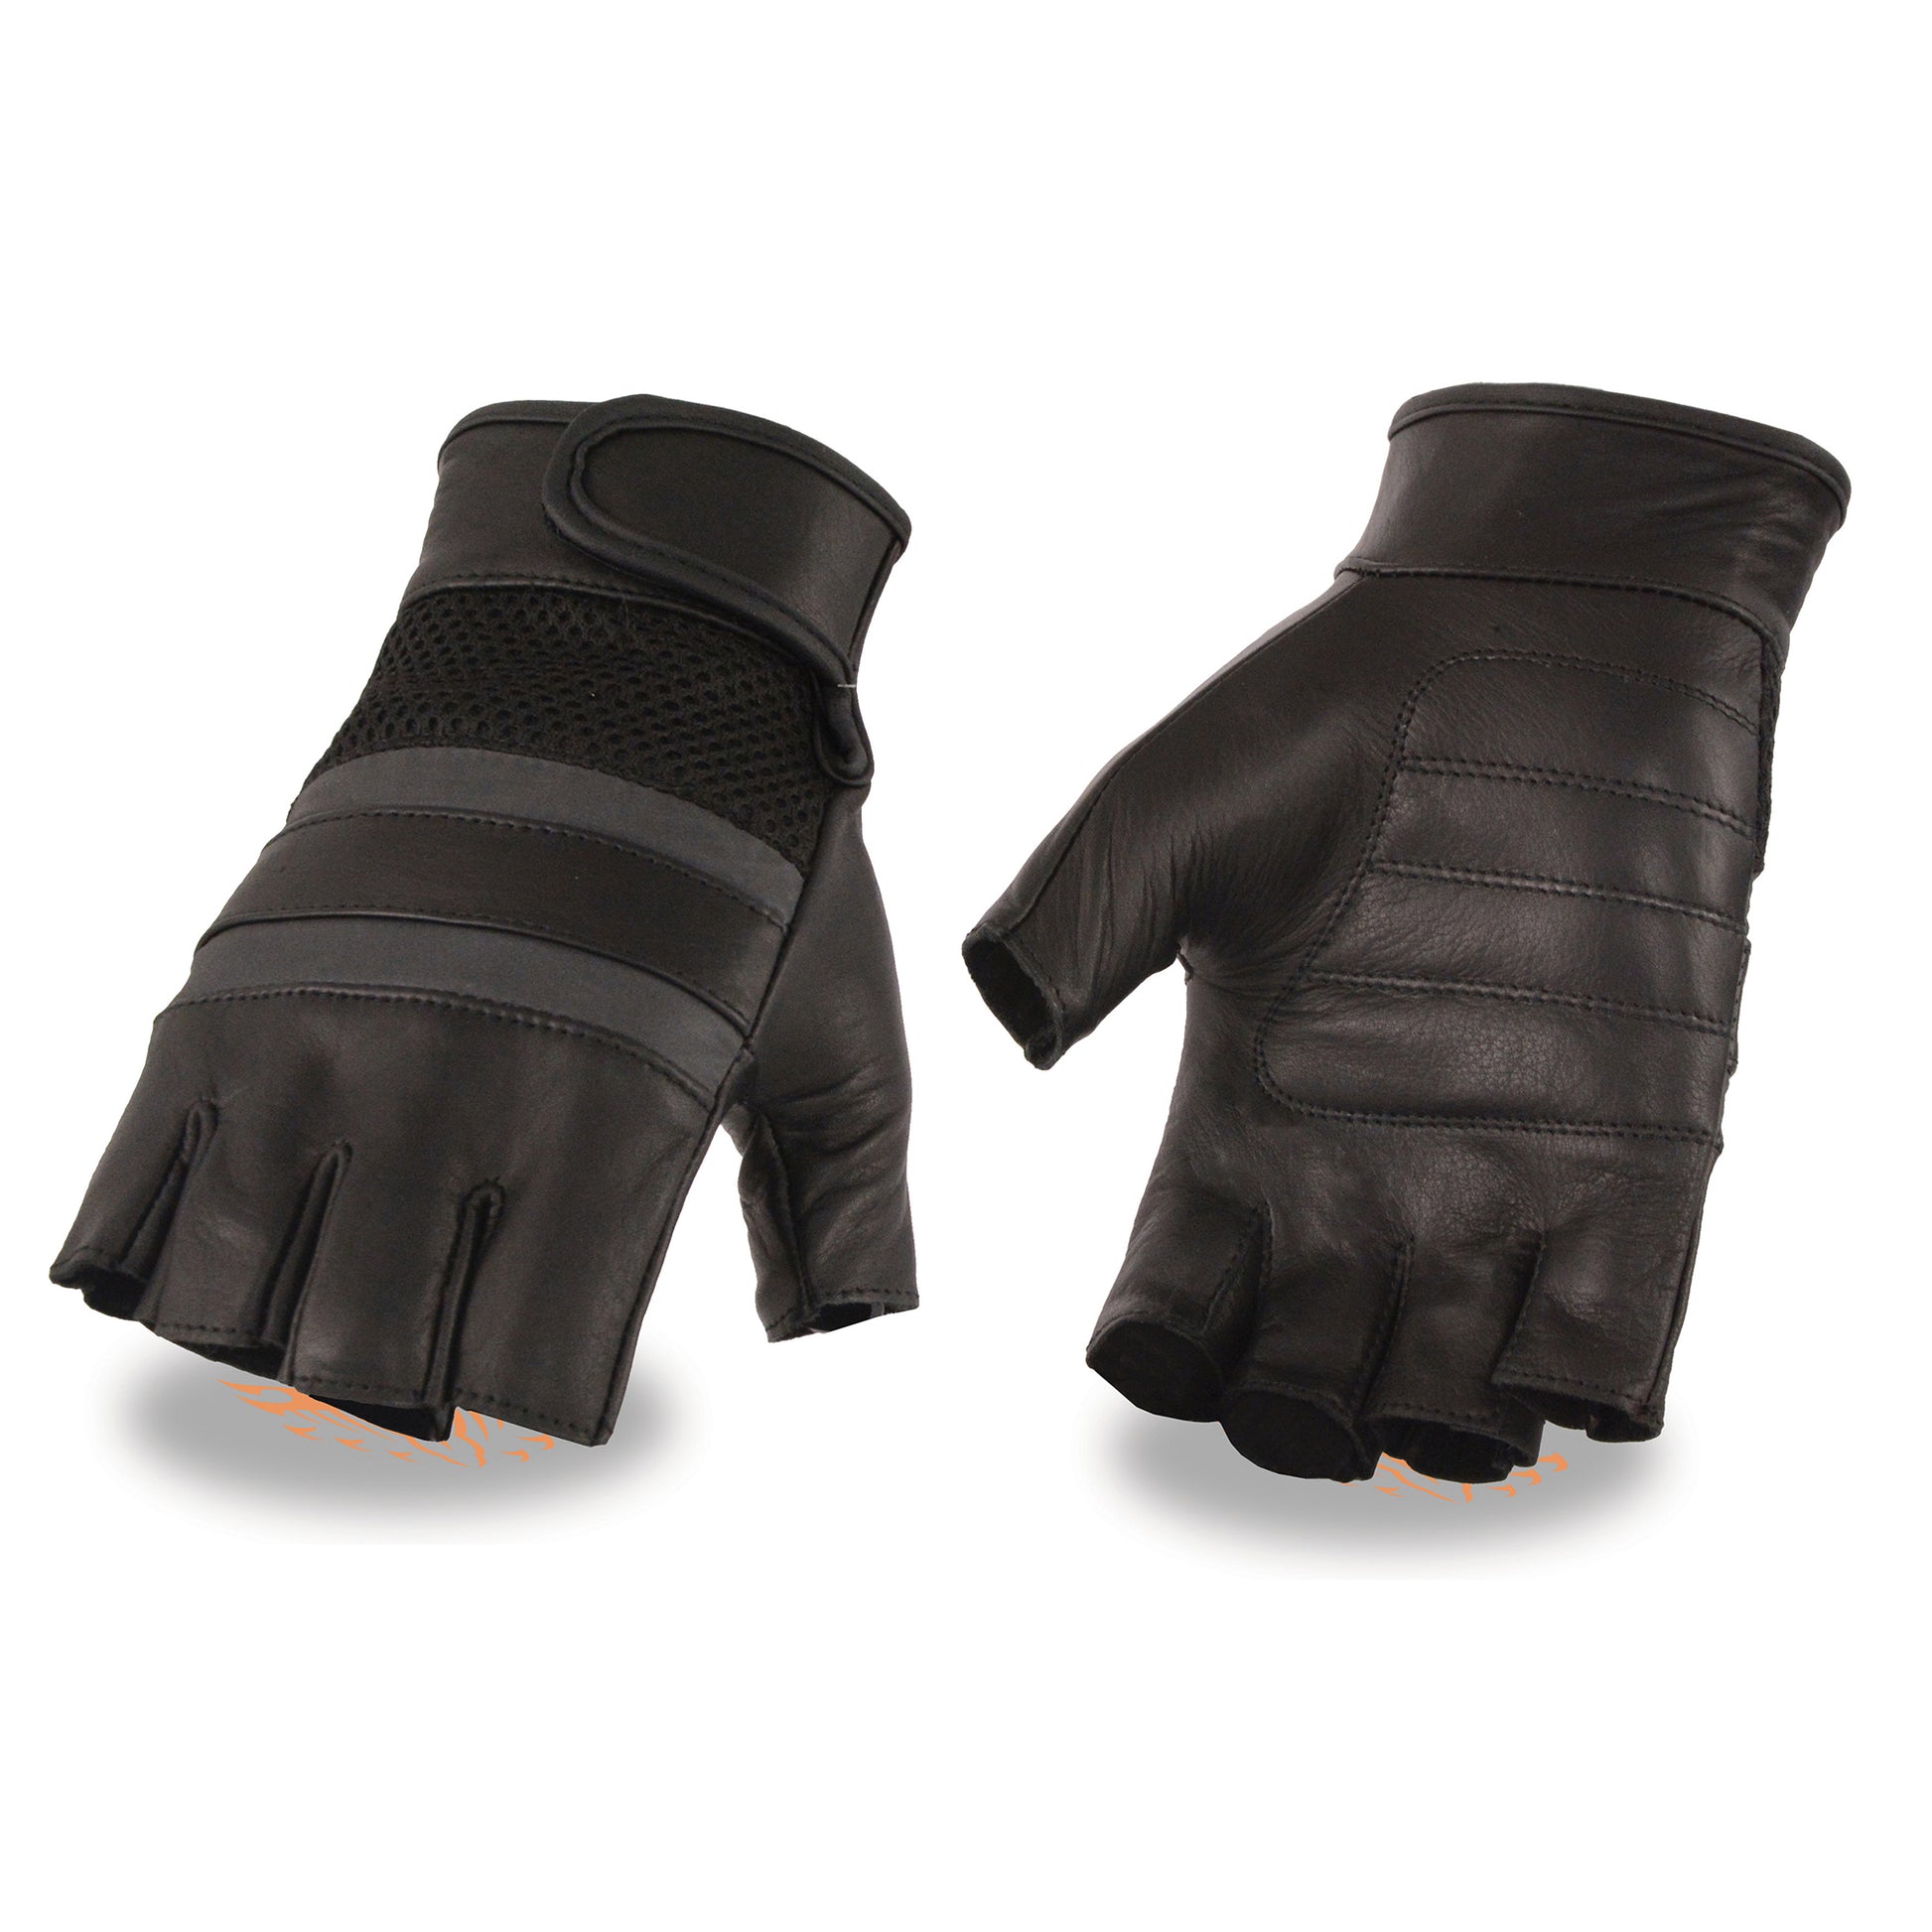 Men's Leather & Mesh Fingerless Gloves with Gel Palm, Reflective Band